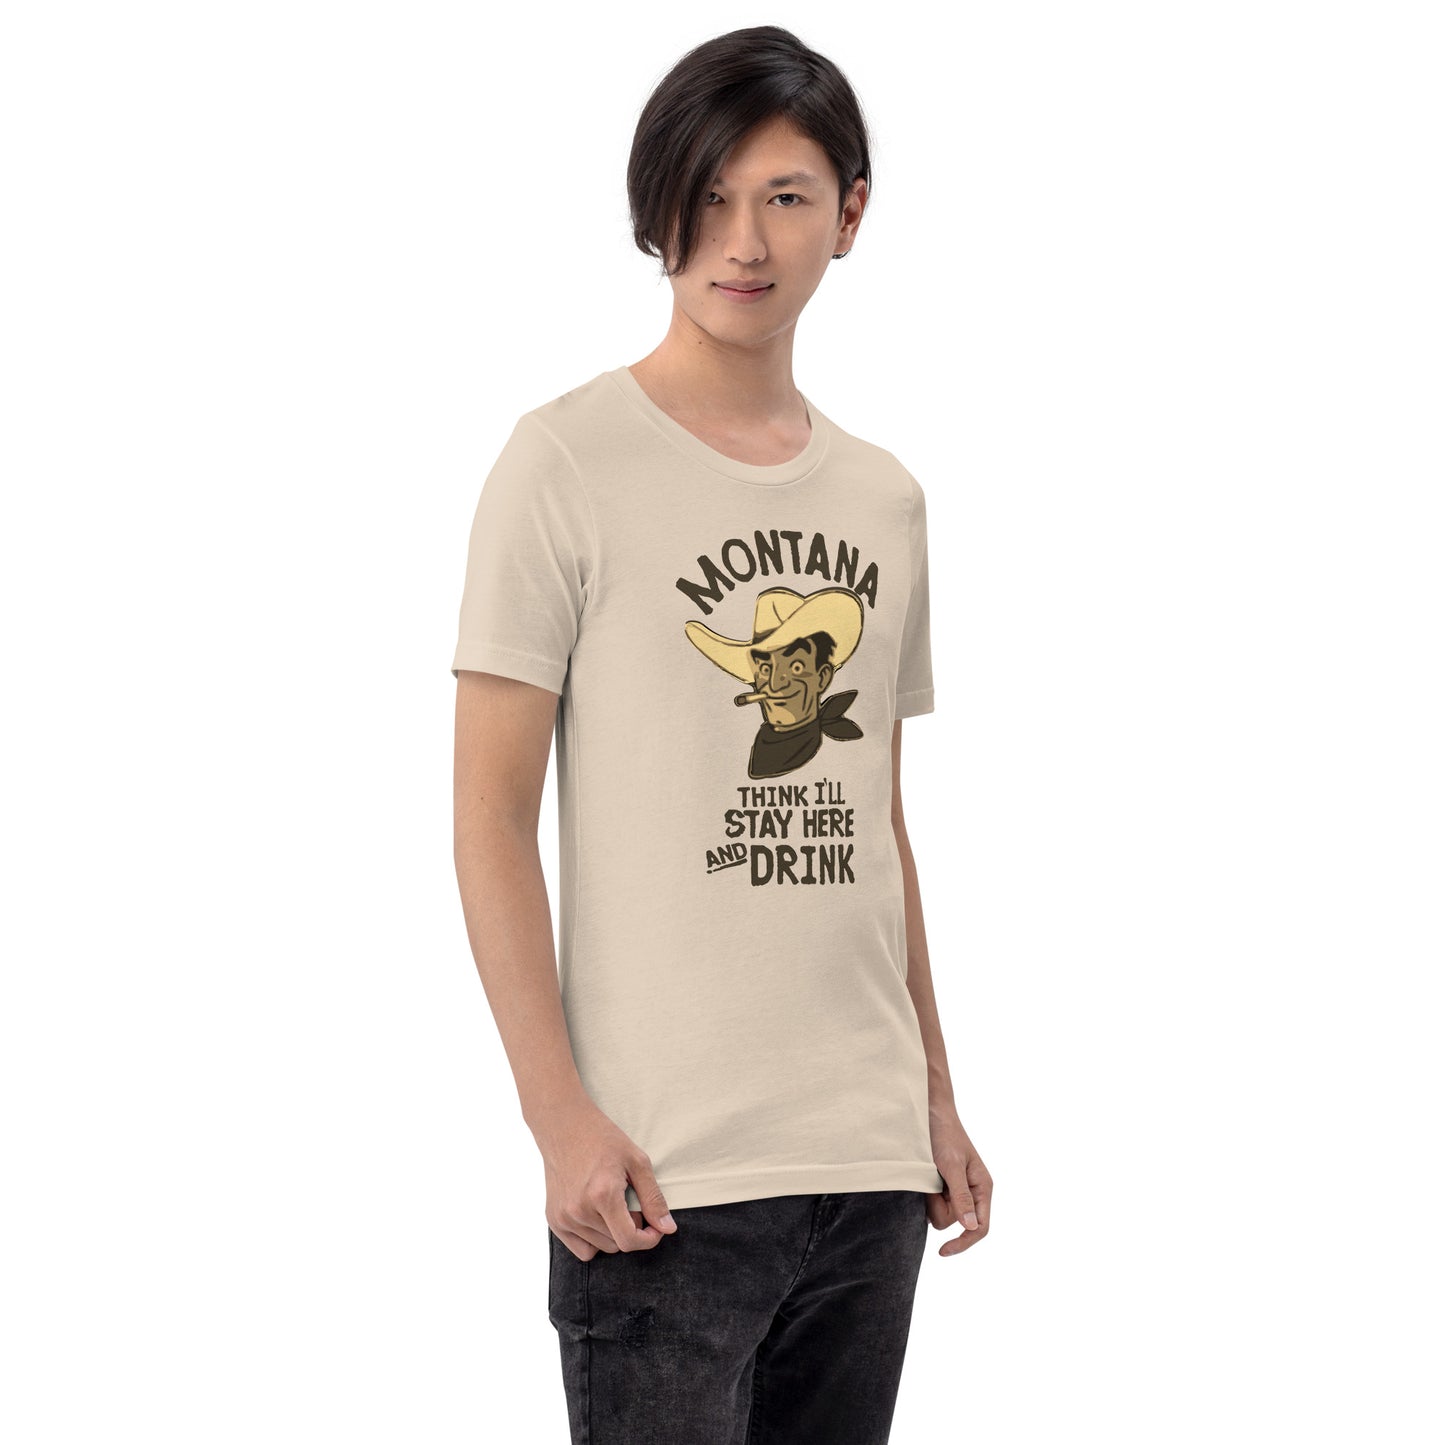 Unisex T-SHIRT - MONTANA I THINK I'LL STAY HERE AND DRINK MONOCHROME